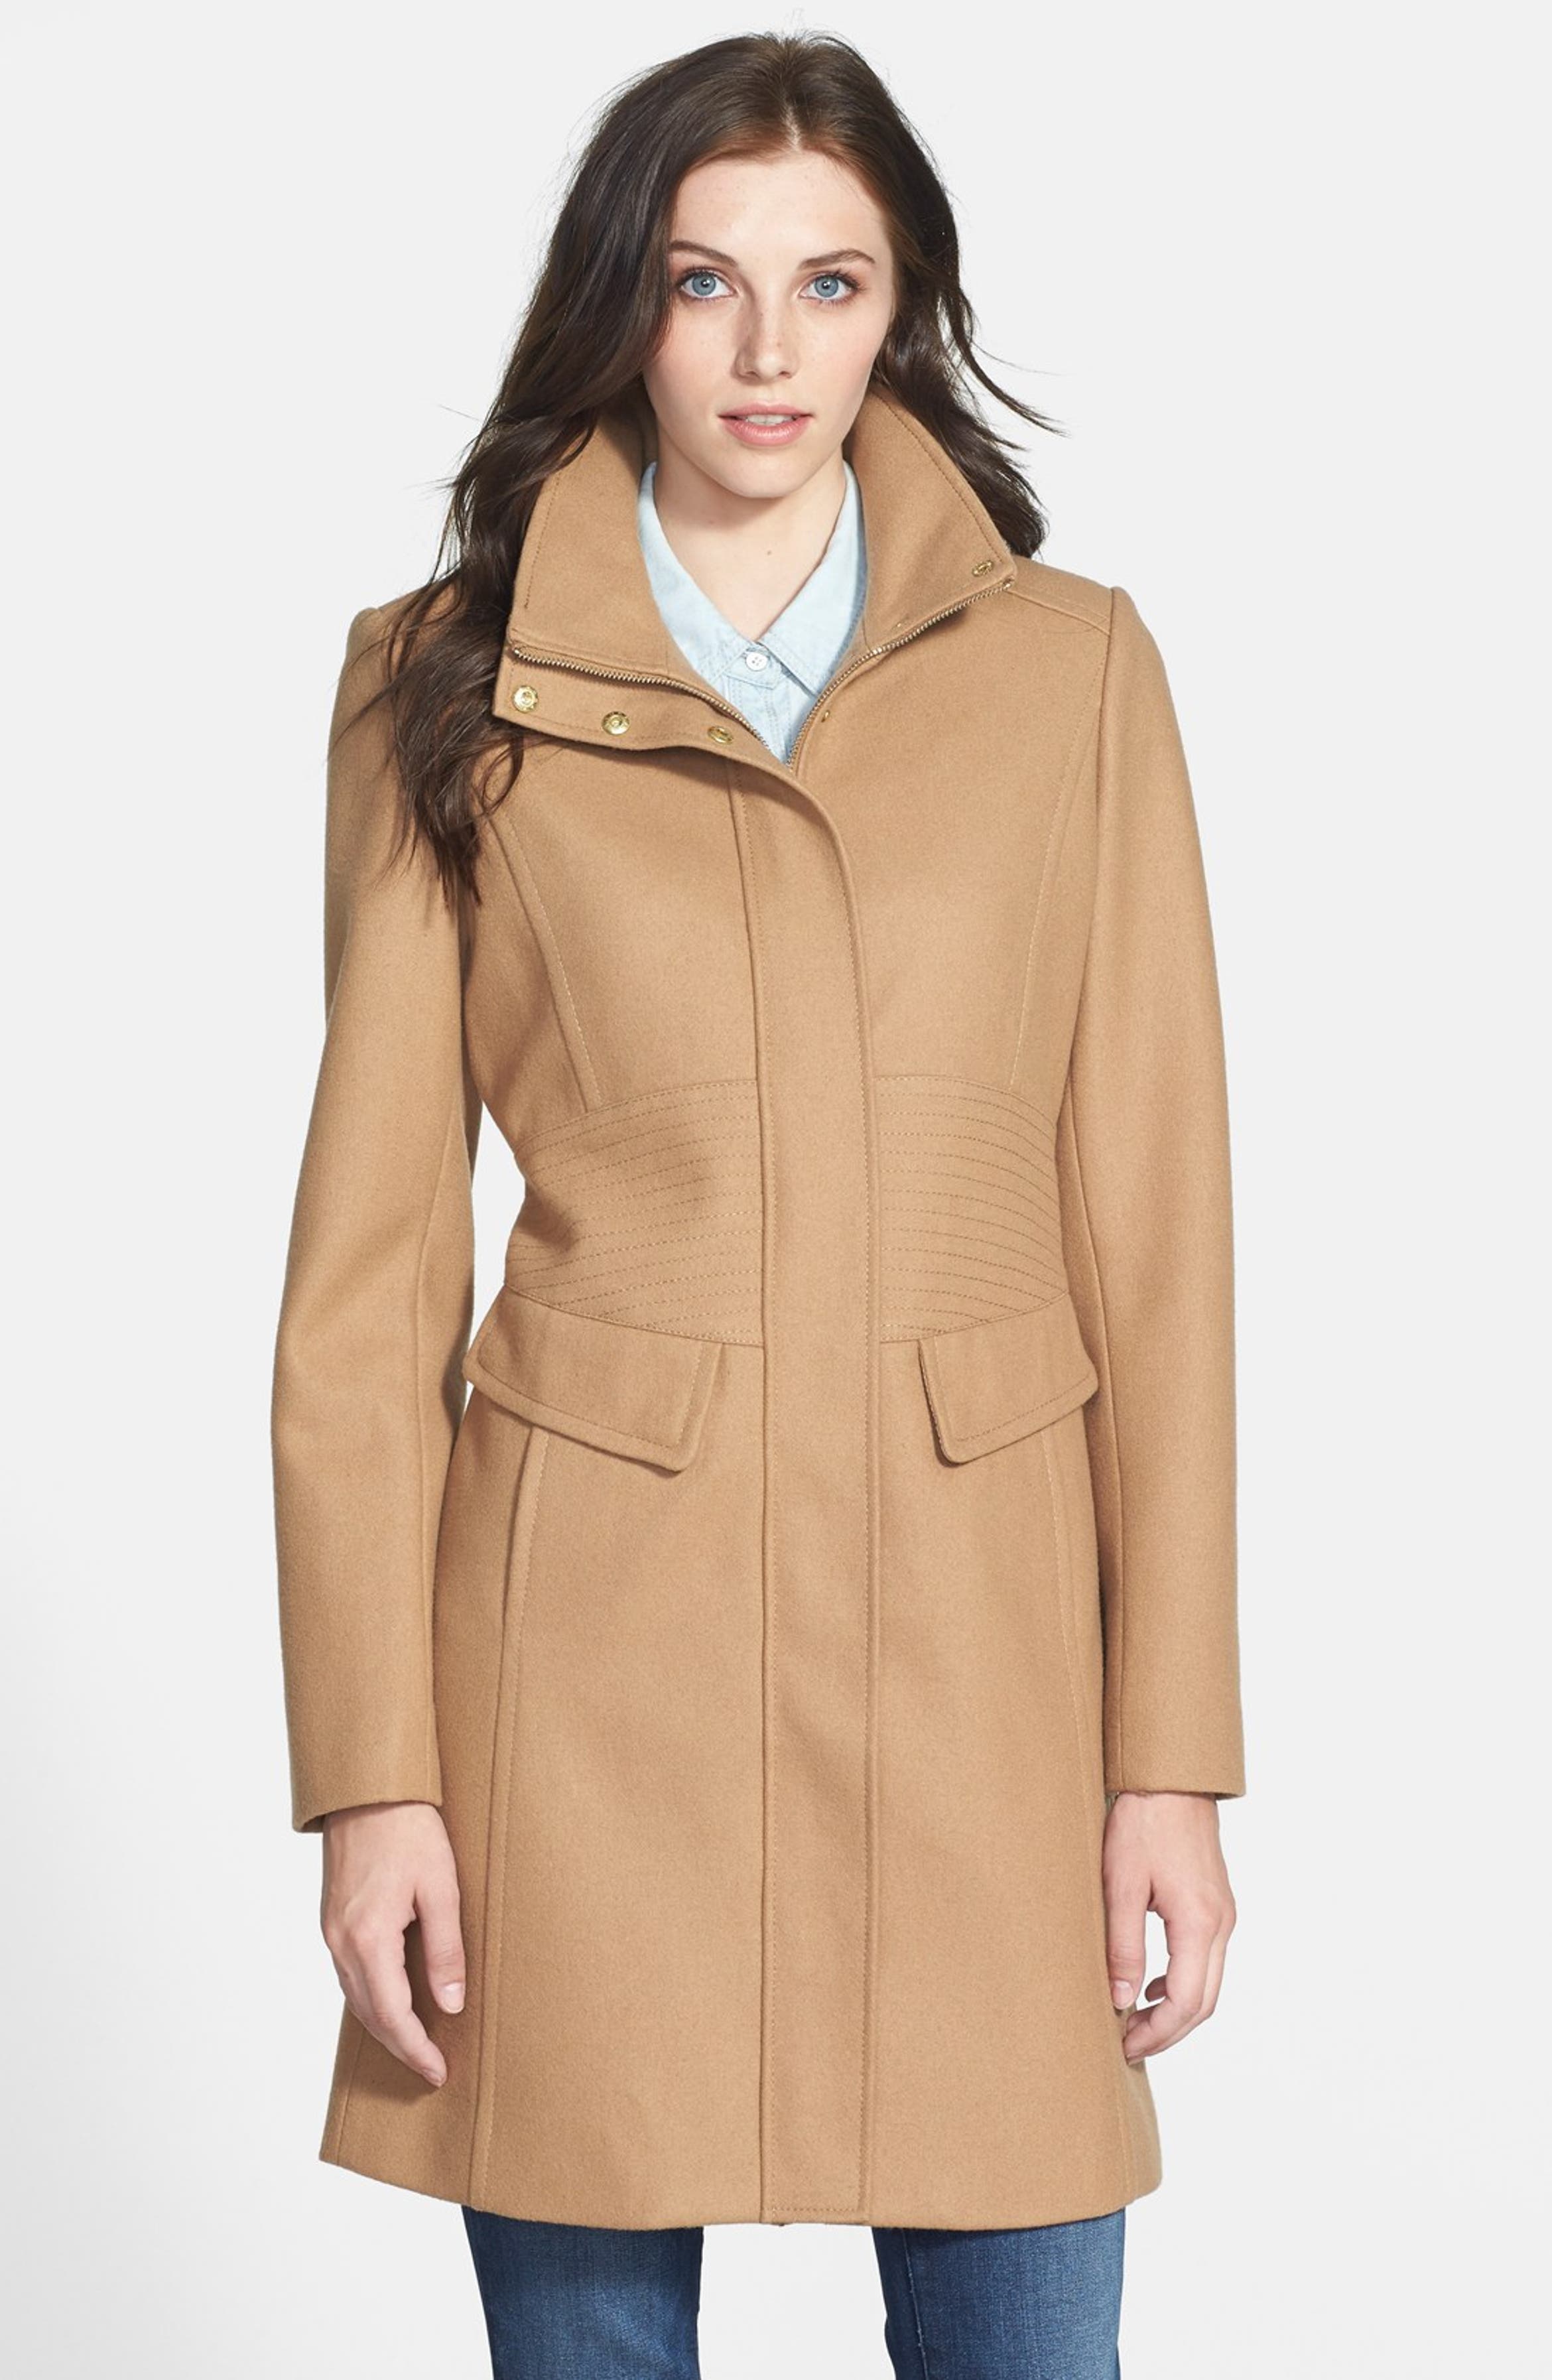 Kenneth Cole New York Inset Waist Stand Collar Walking Coat | Nordstrom